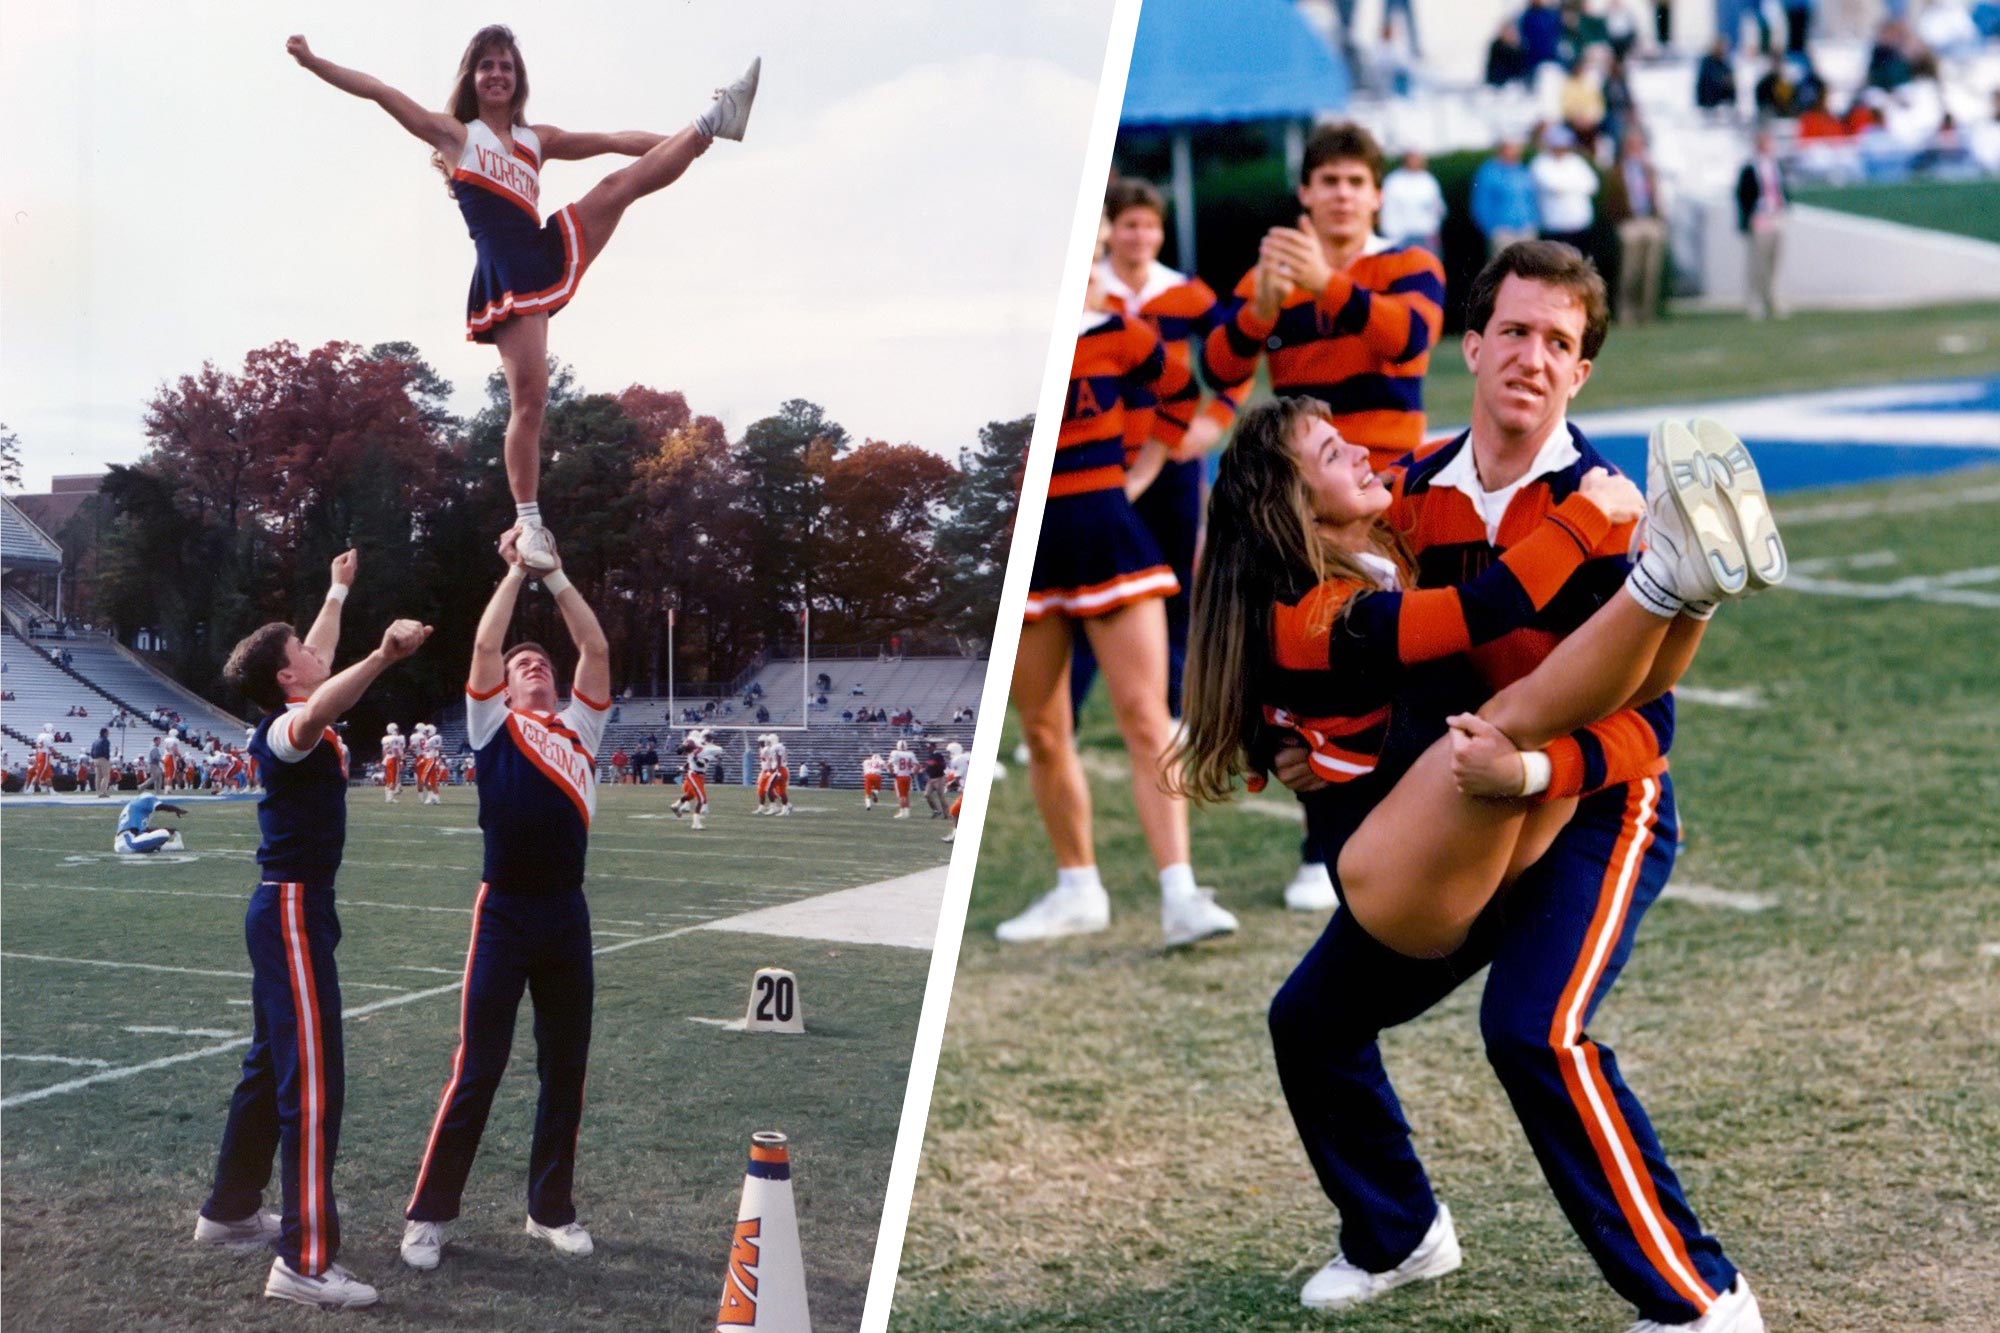 Left: holding a cheerleader in the air. Right: Catching a cheerleader after a stunt